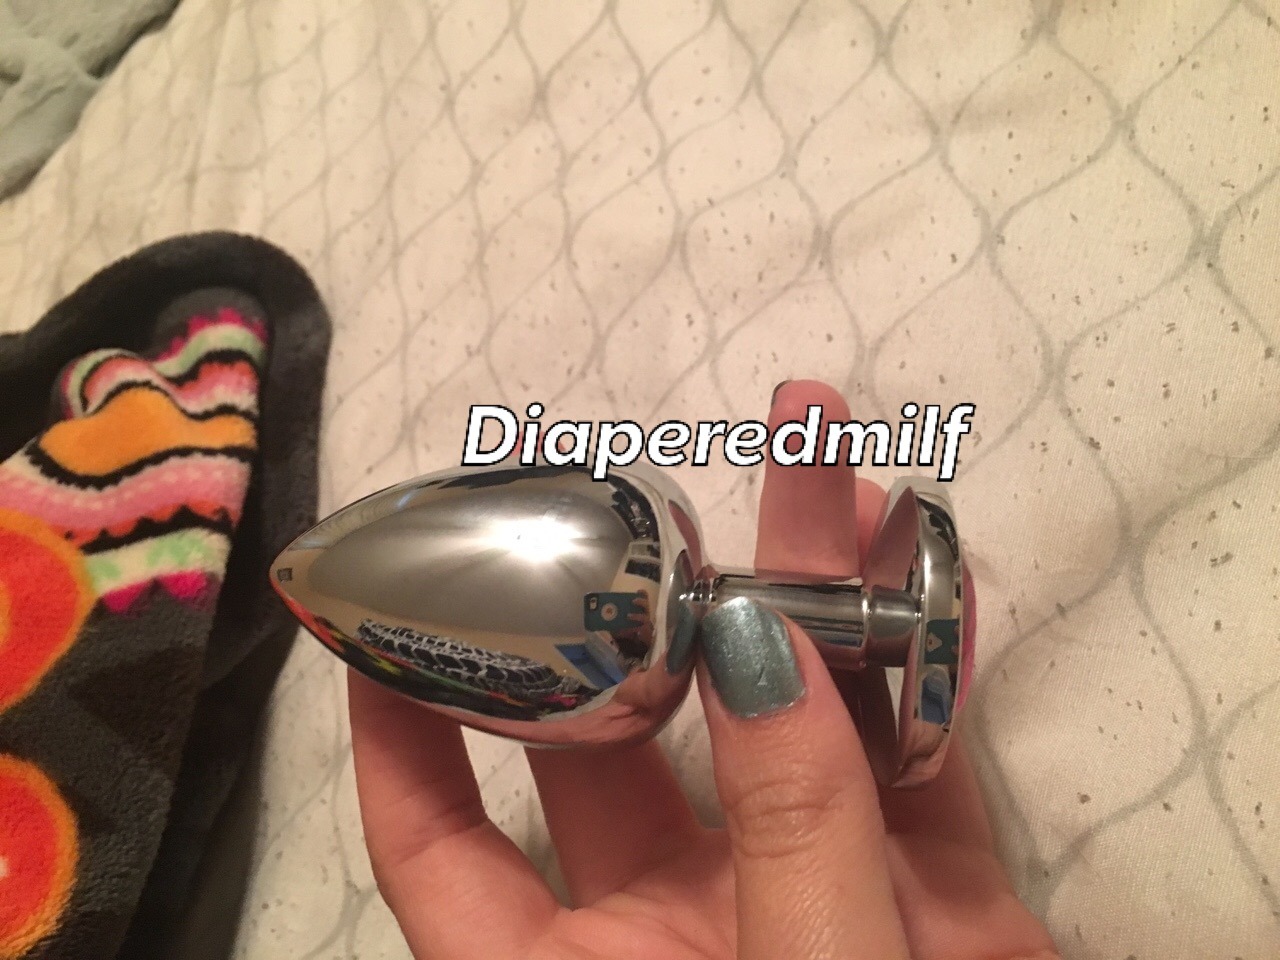 diaperedmilf:Don’t even cry. I don’t care if you say it’s too big. You wanted